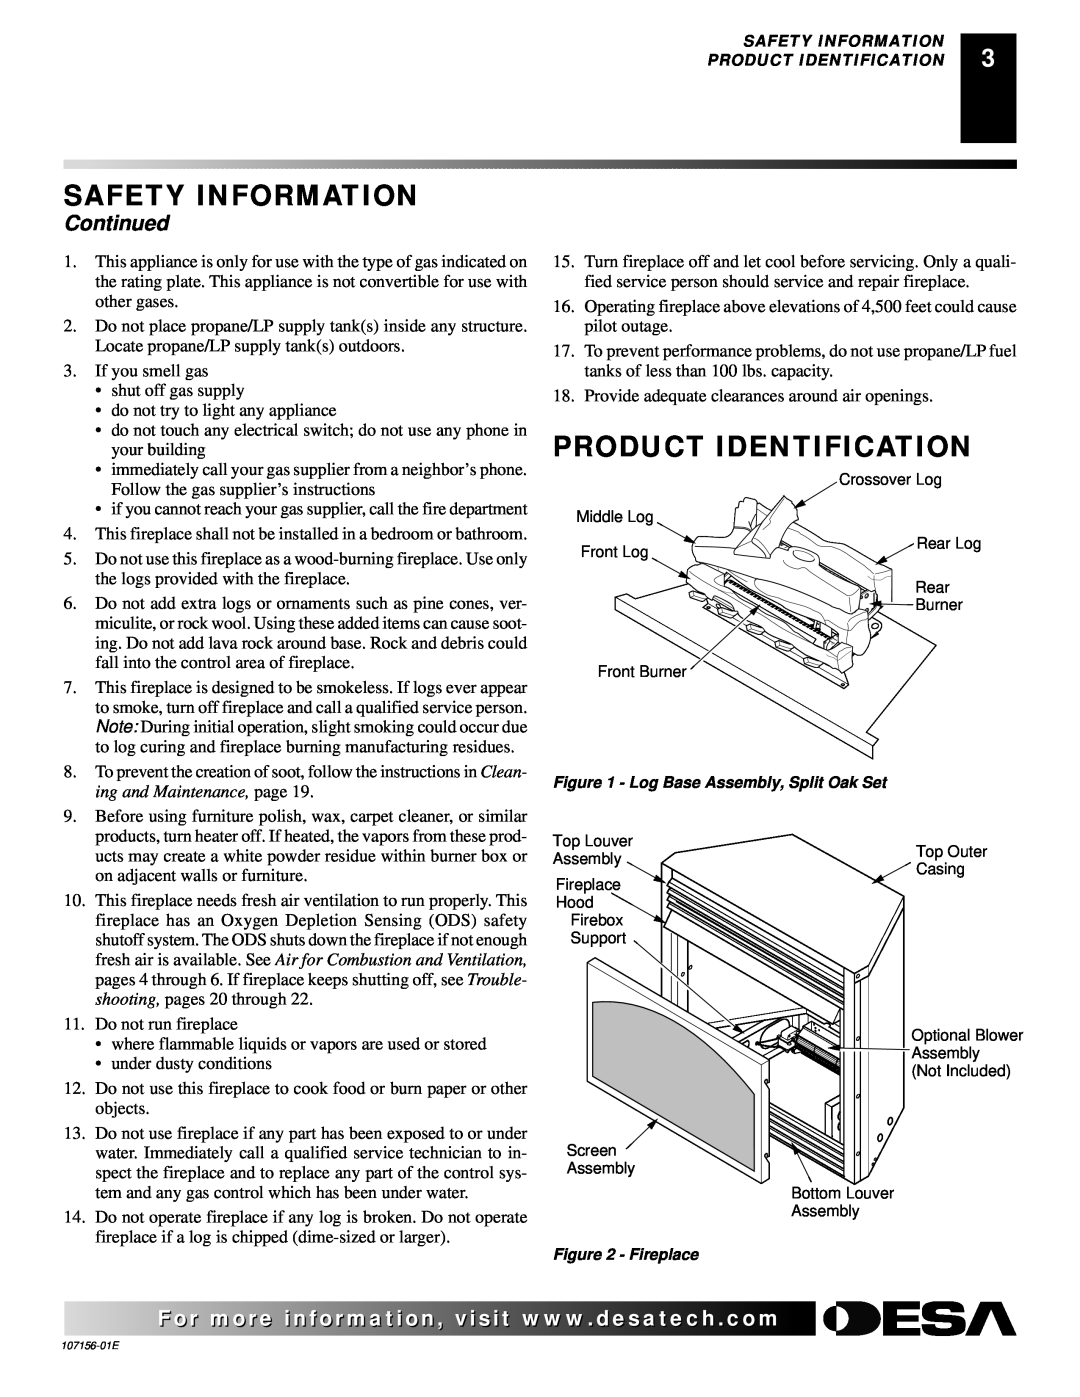 Vanguard Heating 107156-01E.pdf installation manual Product Identification, Continued, Safety Information 